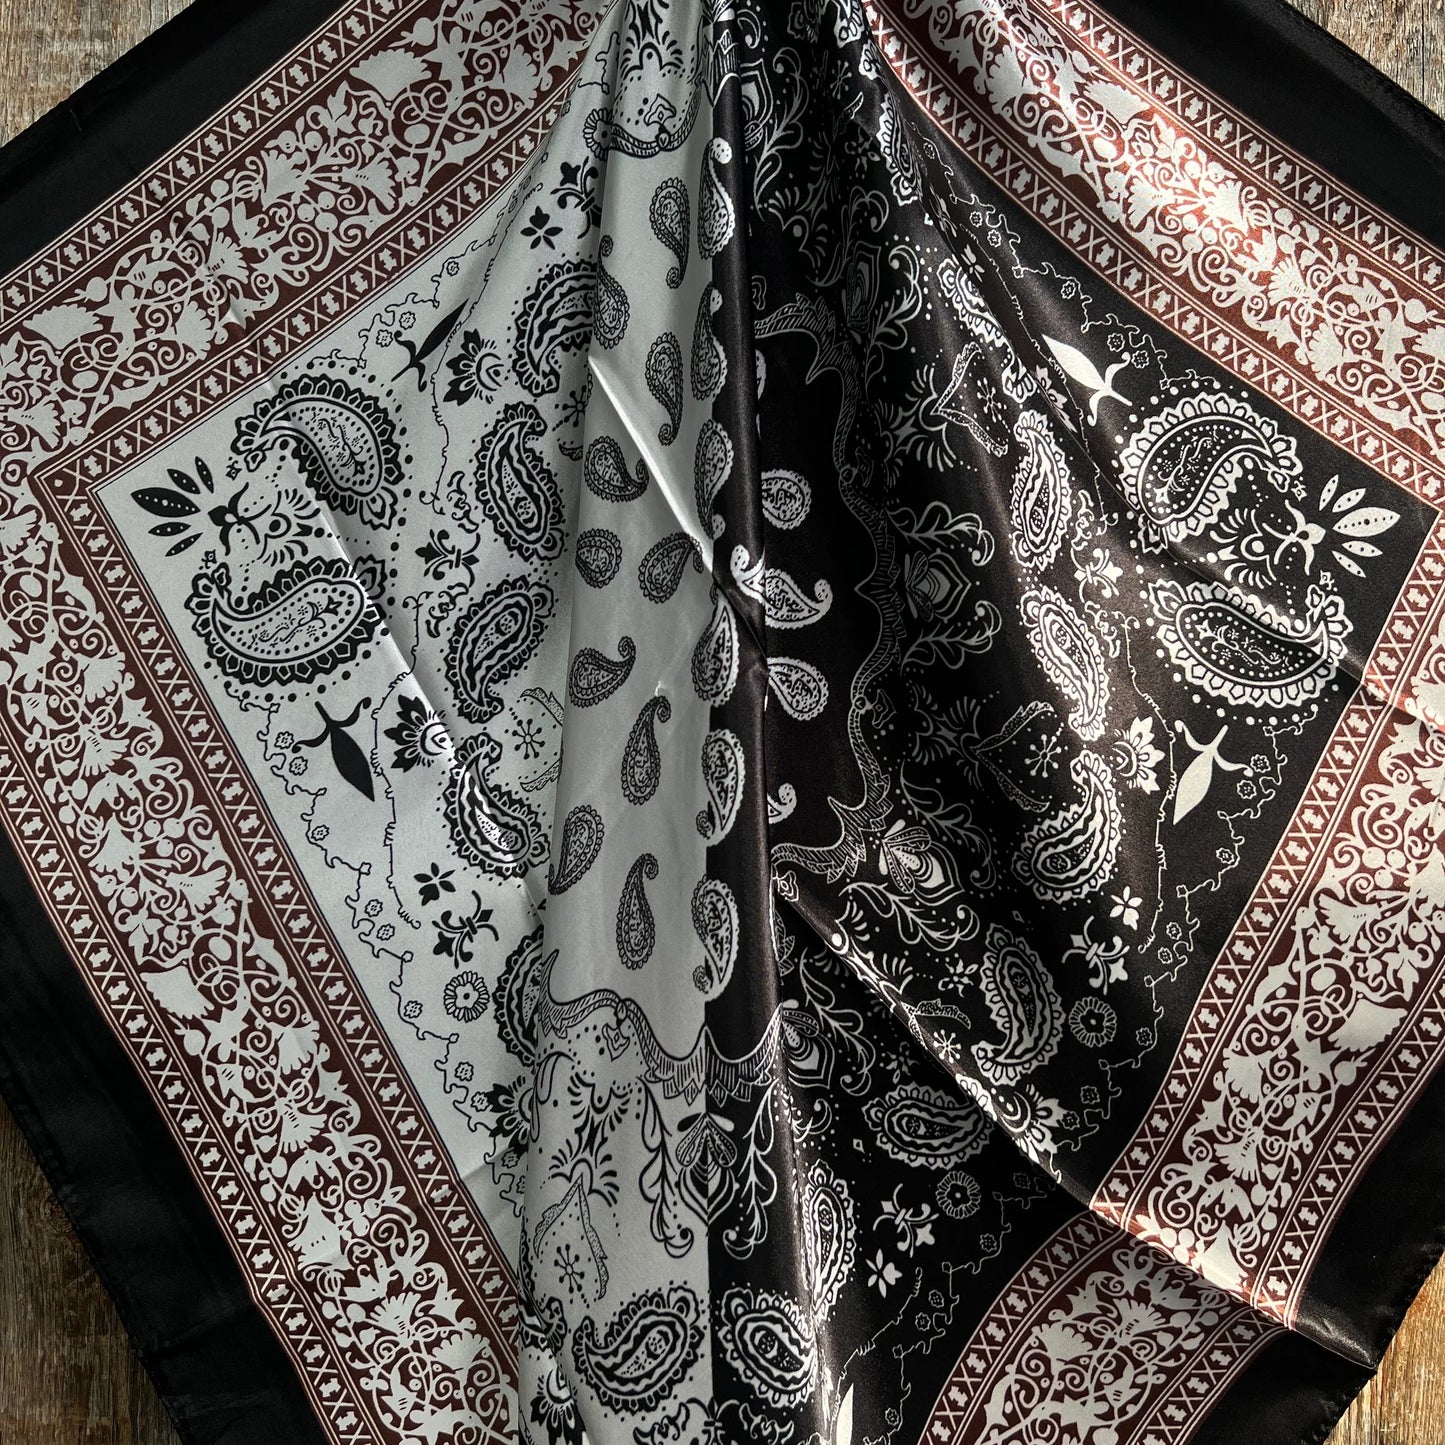 Two Tone Black Paisley Wild Rag | Rodeo Wildrags at Bourbon Cowgirl